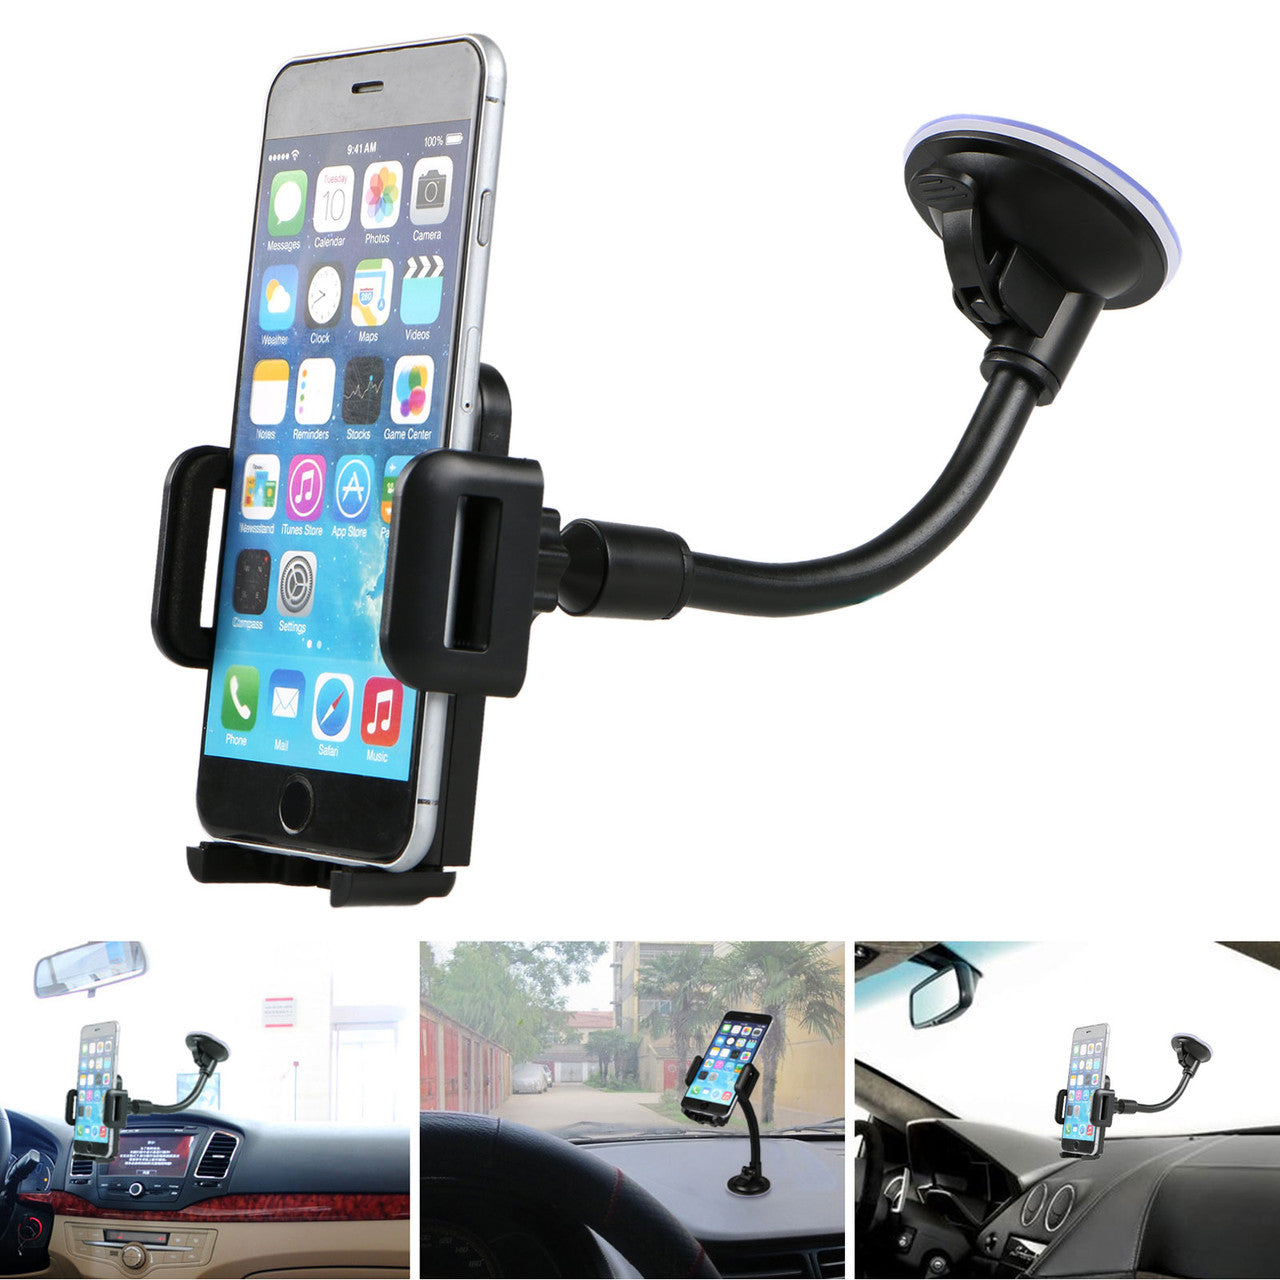 360 Degree Universal Windshield Dashboard Long Arm Car Phone Holder for iPhone XS/XR/X/8/7/6S/6 Plus, Samsung Galaxy S10/S10E/S10 Plus/S9 Plus, LG G7/G6/V40, and All 4-6 inch Smartphones